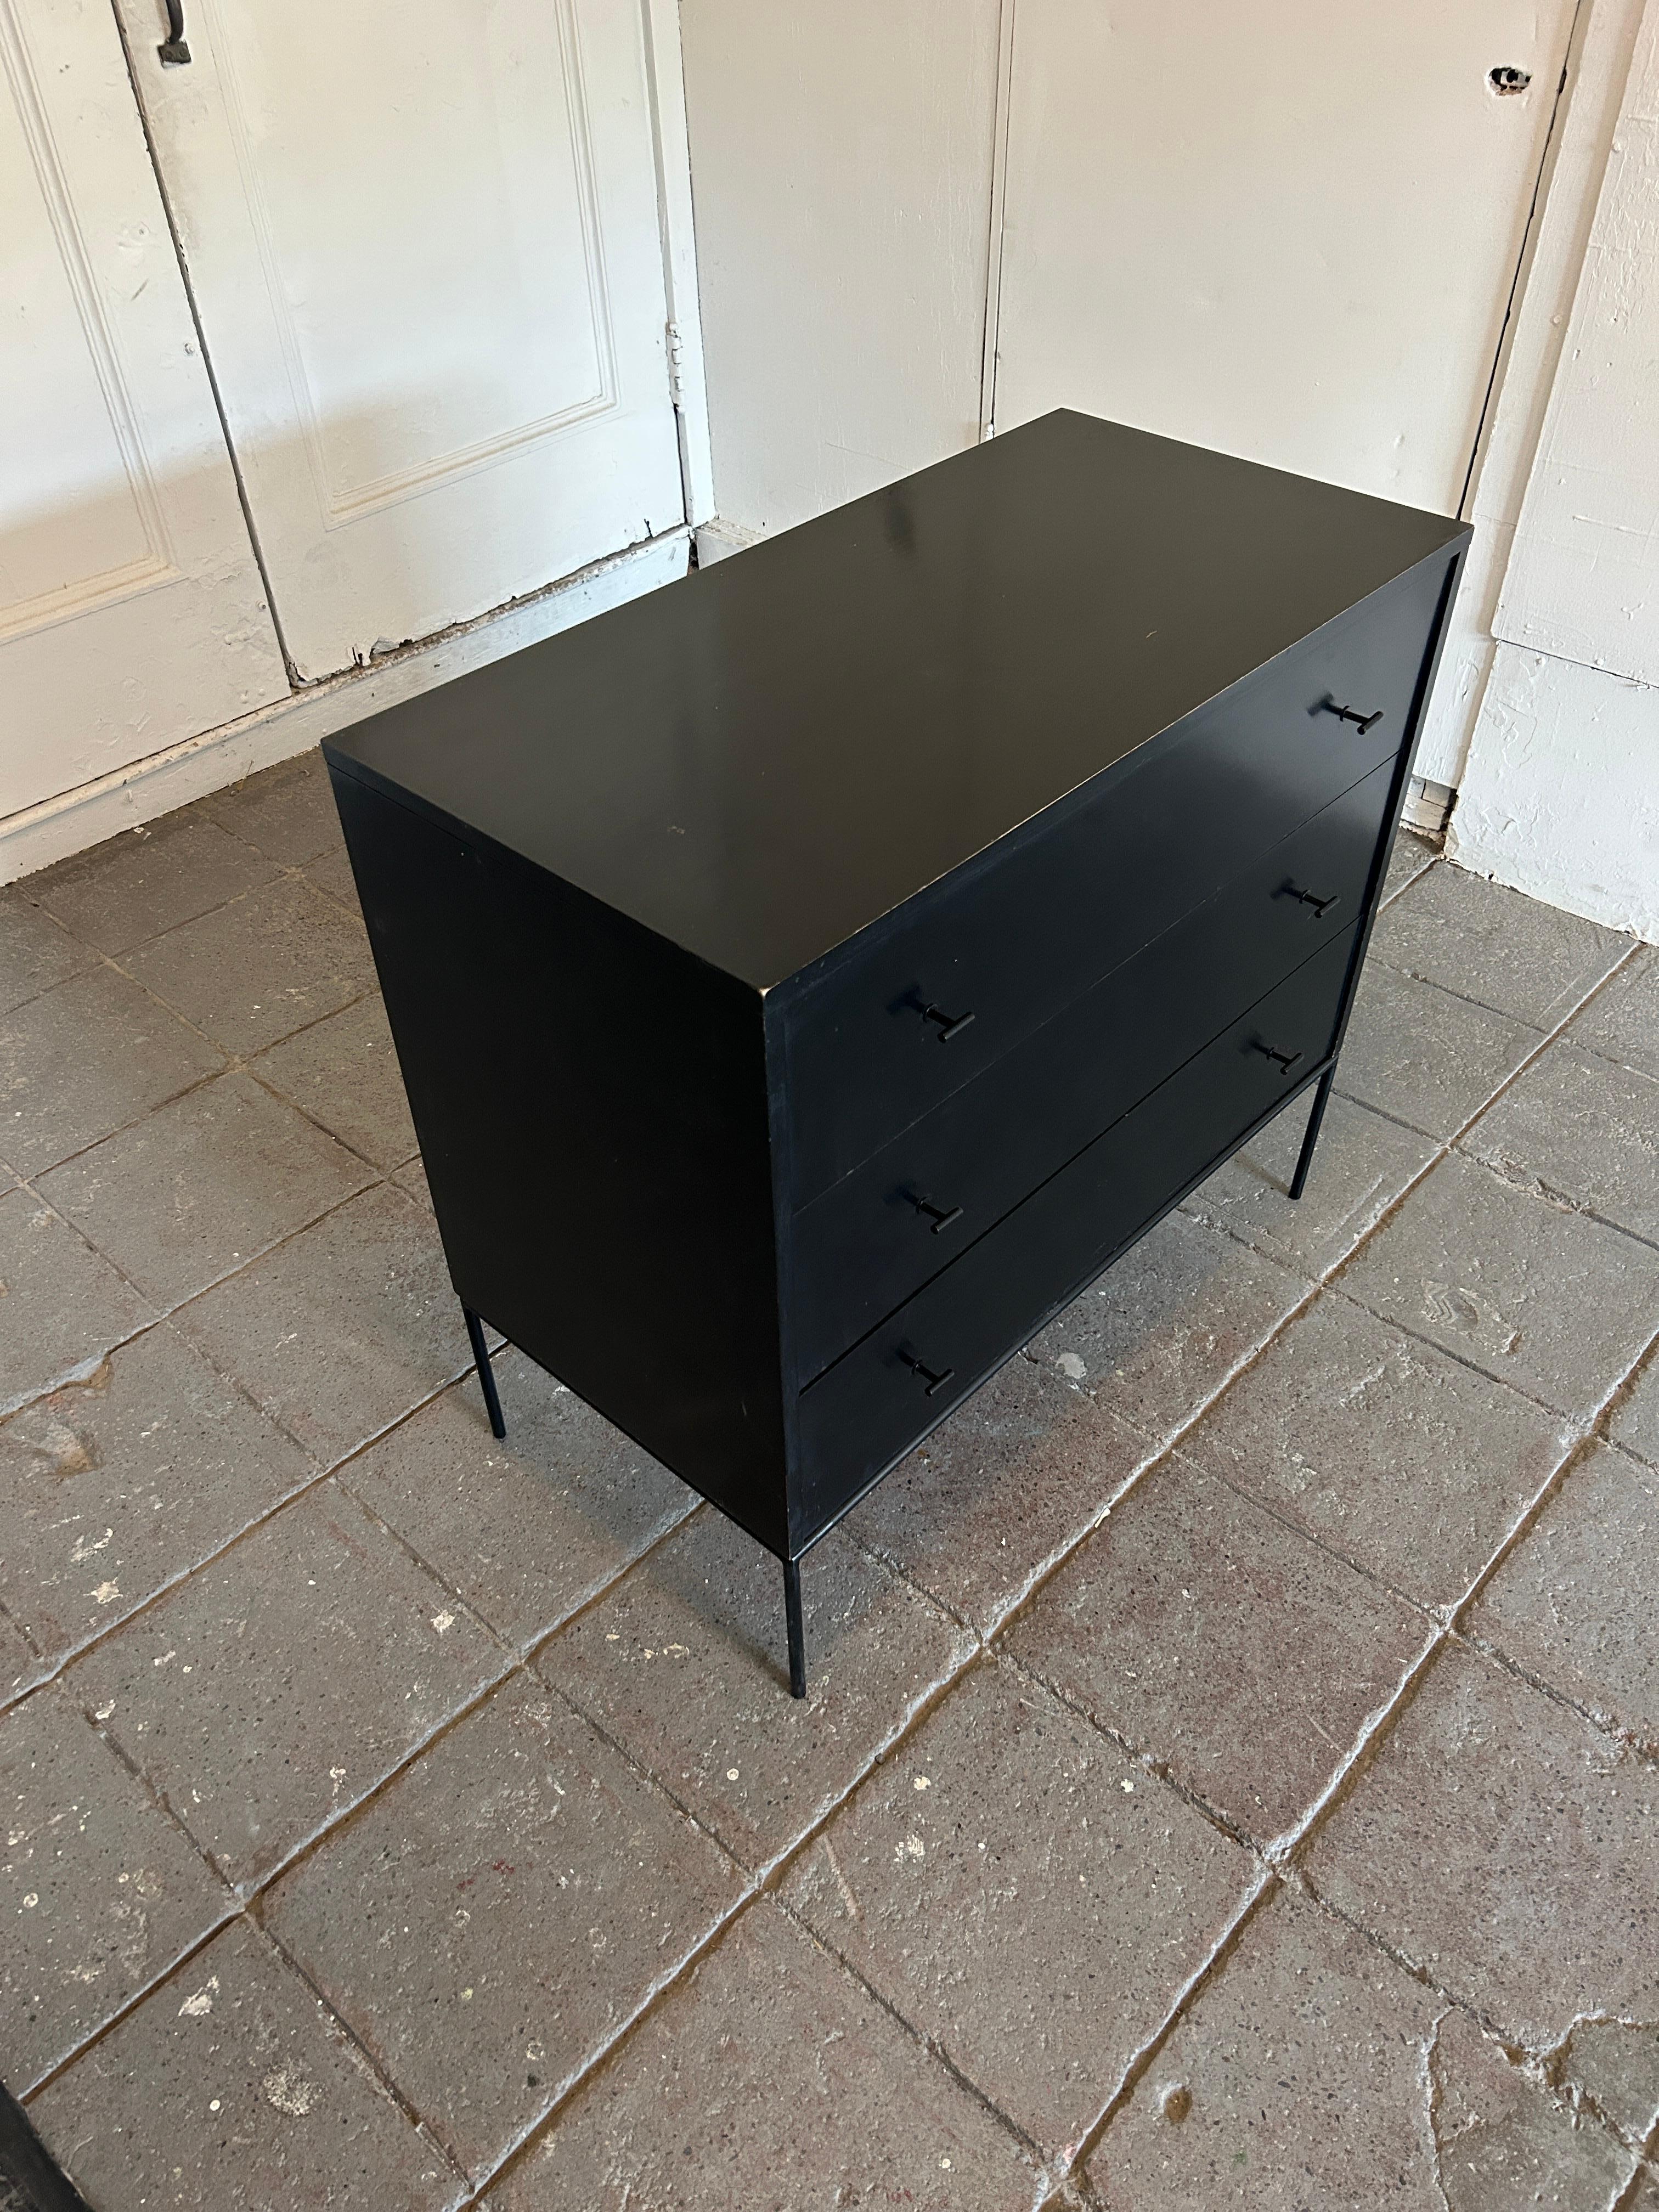 Mid-Century Modern black lacquer three-drawer dresser by Paul McCobb for Winchendon Furniture Company. All Original Black Lacquer paint finish with Blonde maple drawer insides. Black Steel T Pulls and Iron base. Labeled inside drawer with foil